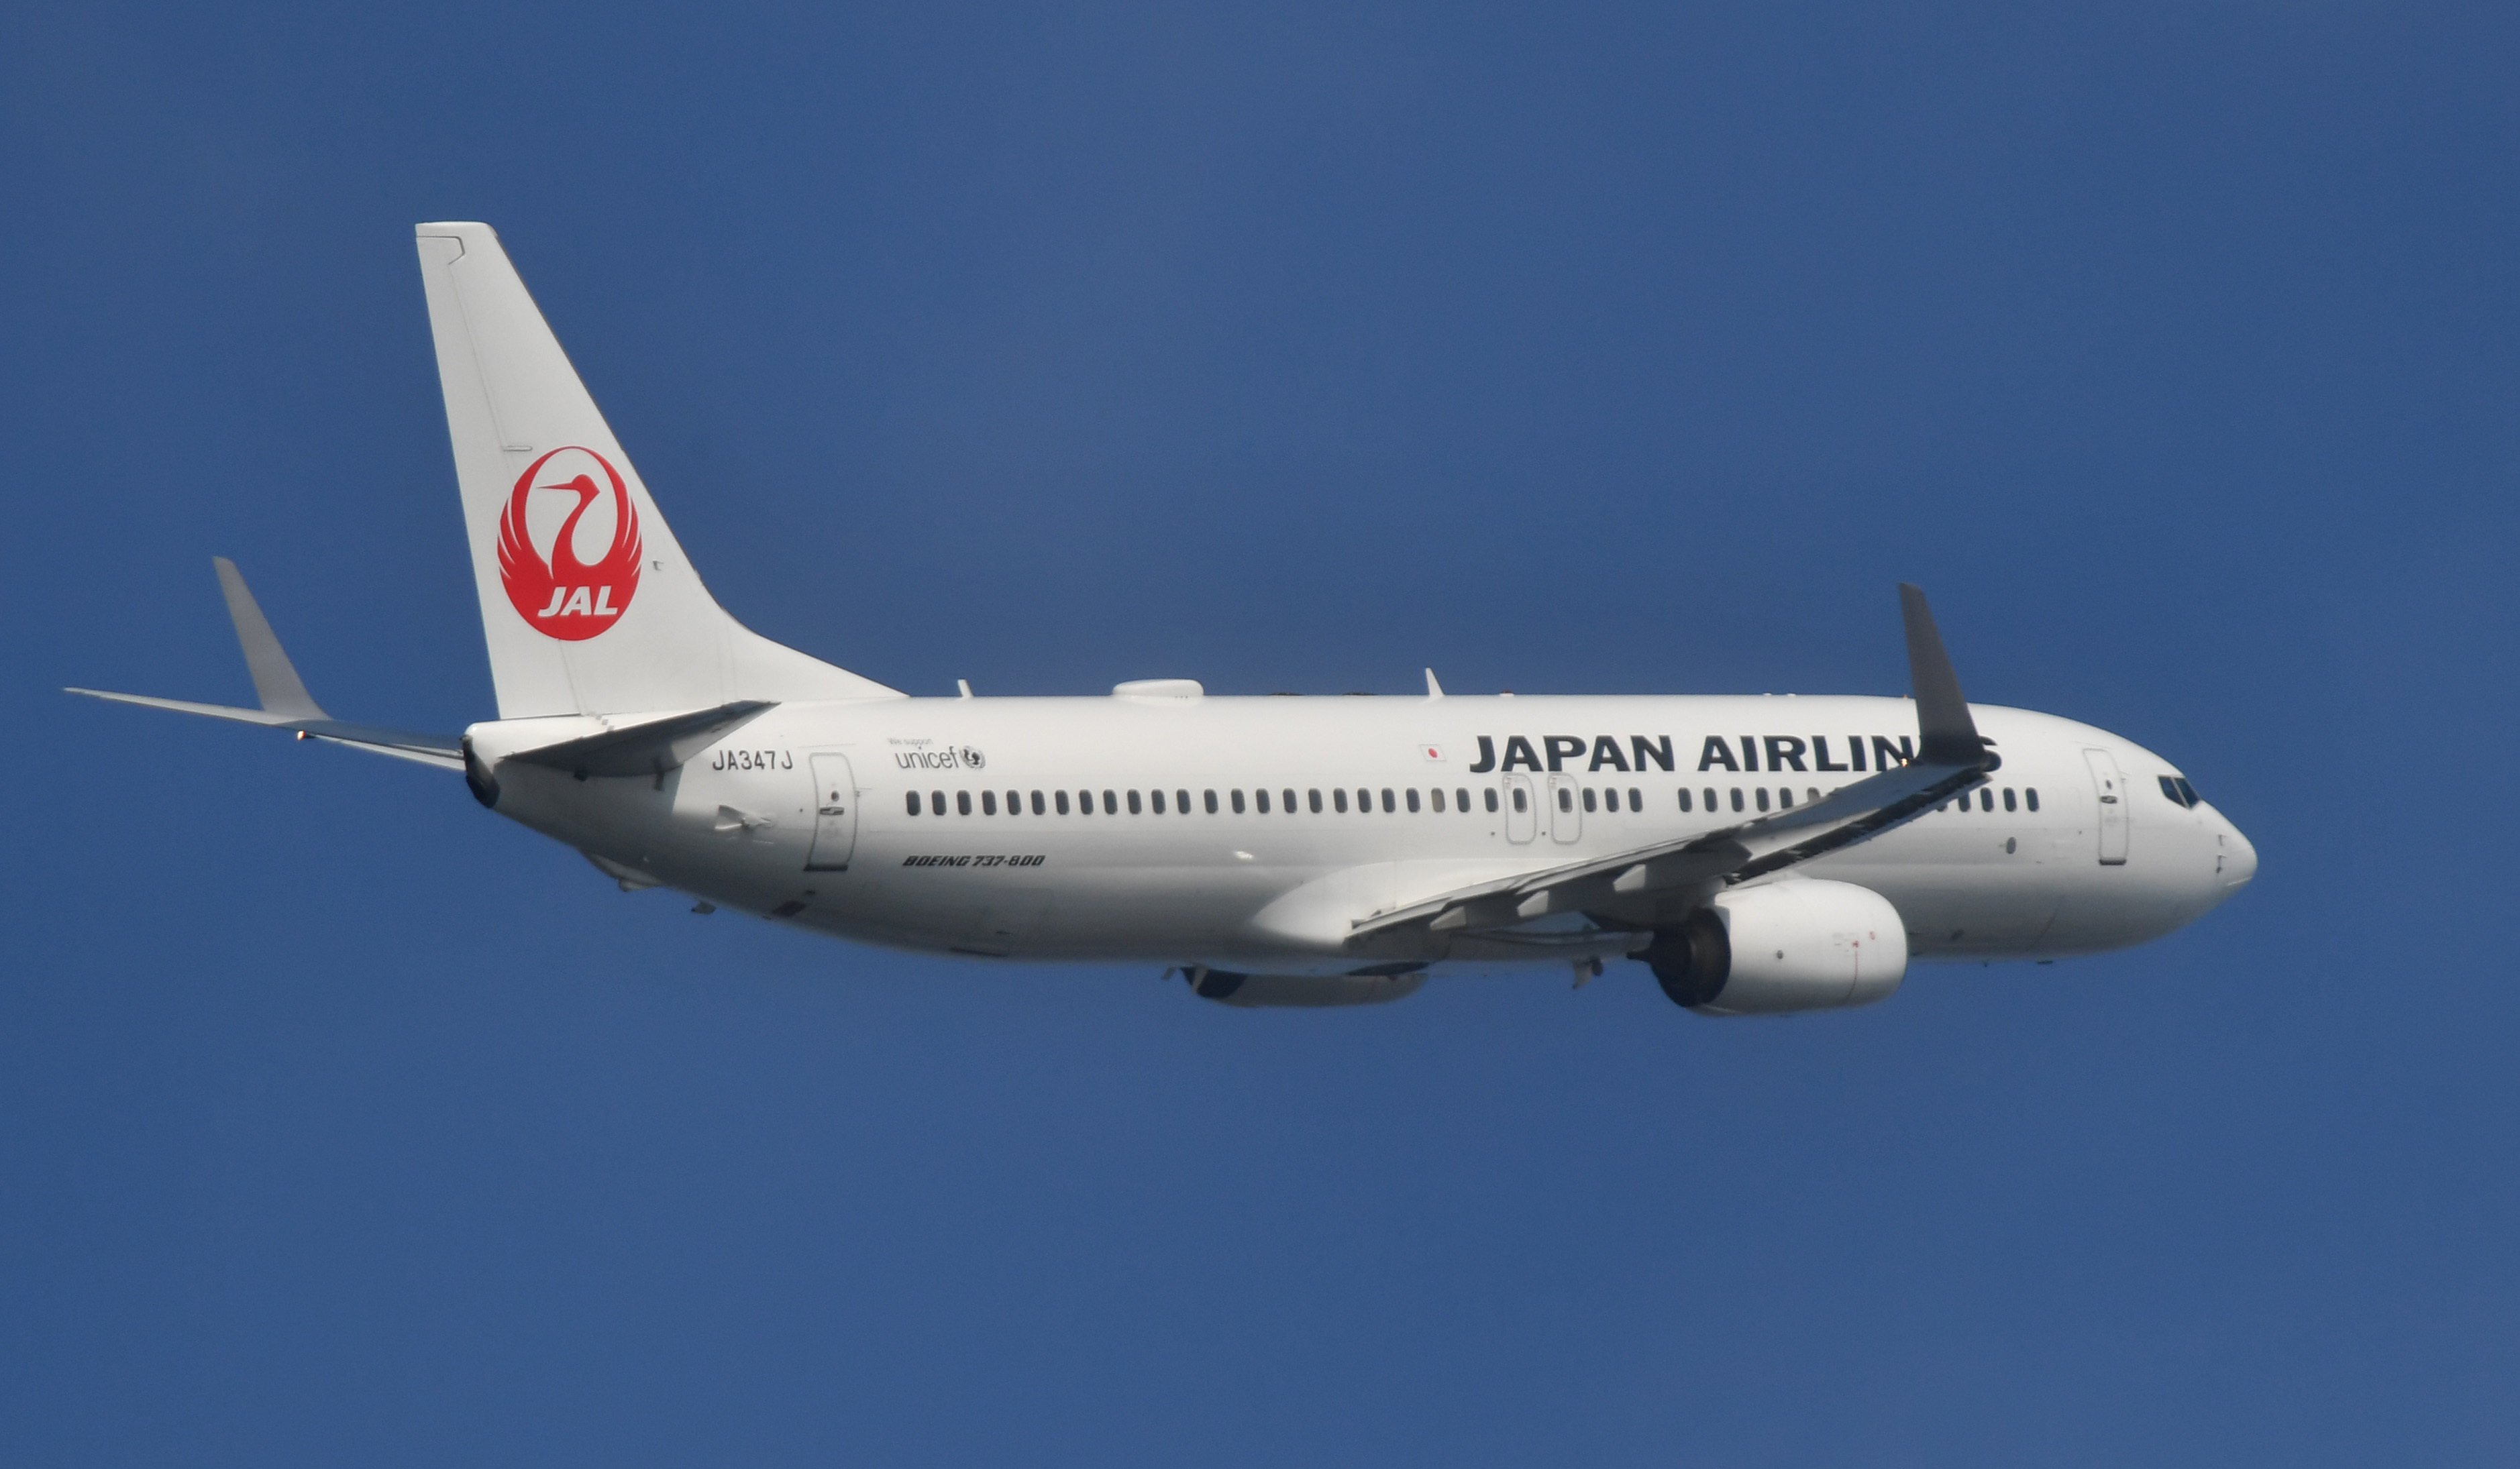 Japan Airlines was ranked as the best airline according to a luggage storge company, just ahead of Singapore Airlines. Photo: Kyodo